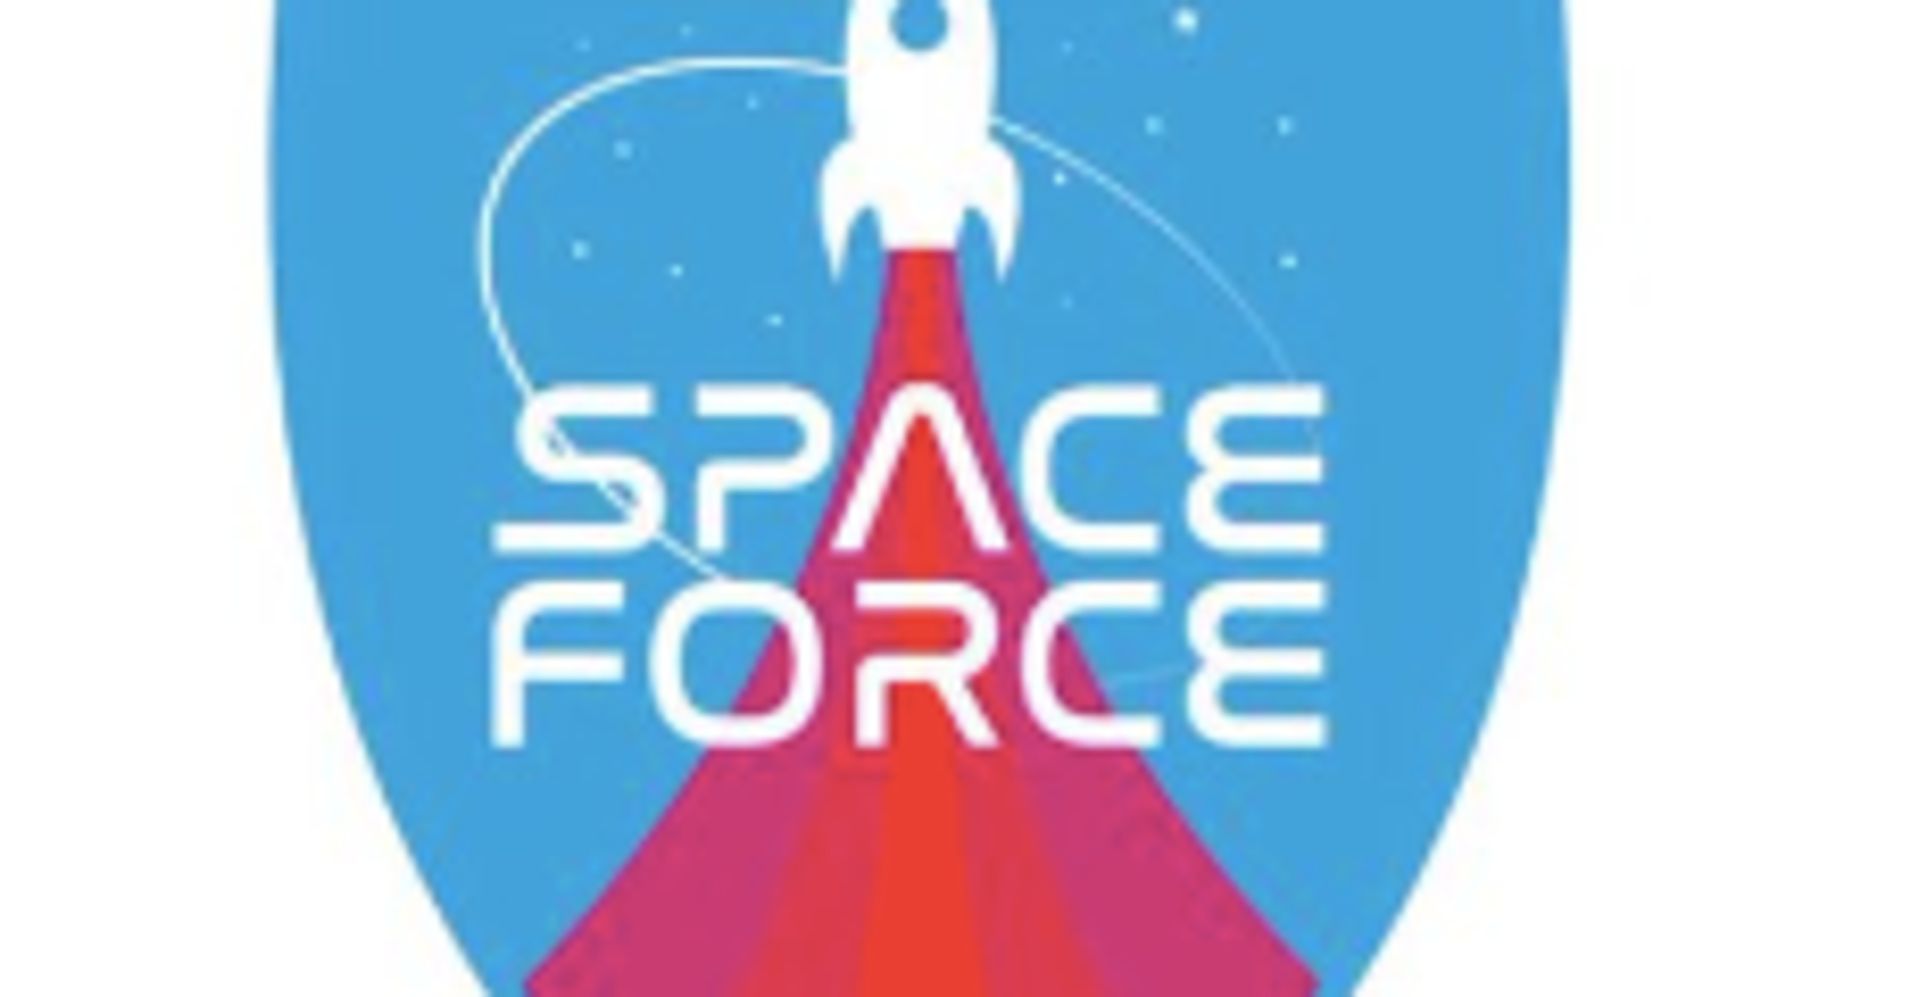 Twitter Users Offer Trump Their Own Space Force Logo Ideas | HuffPost